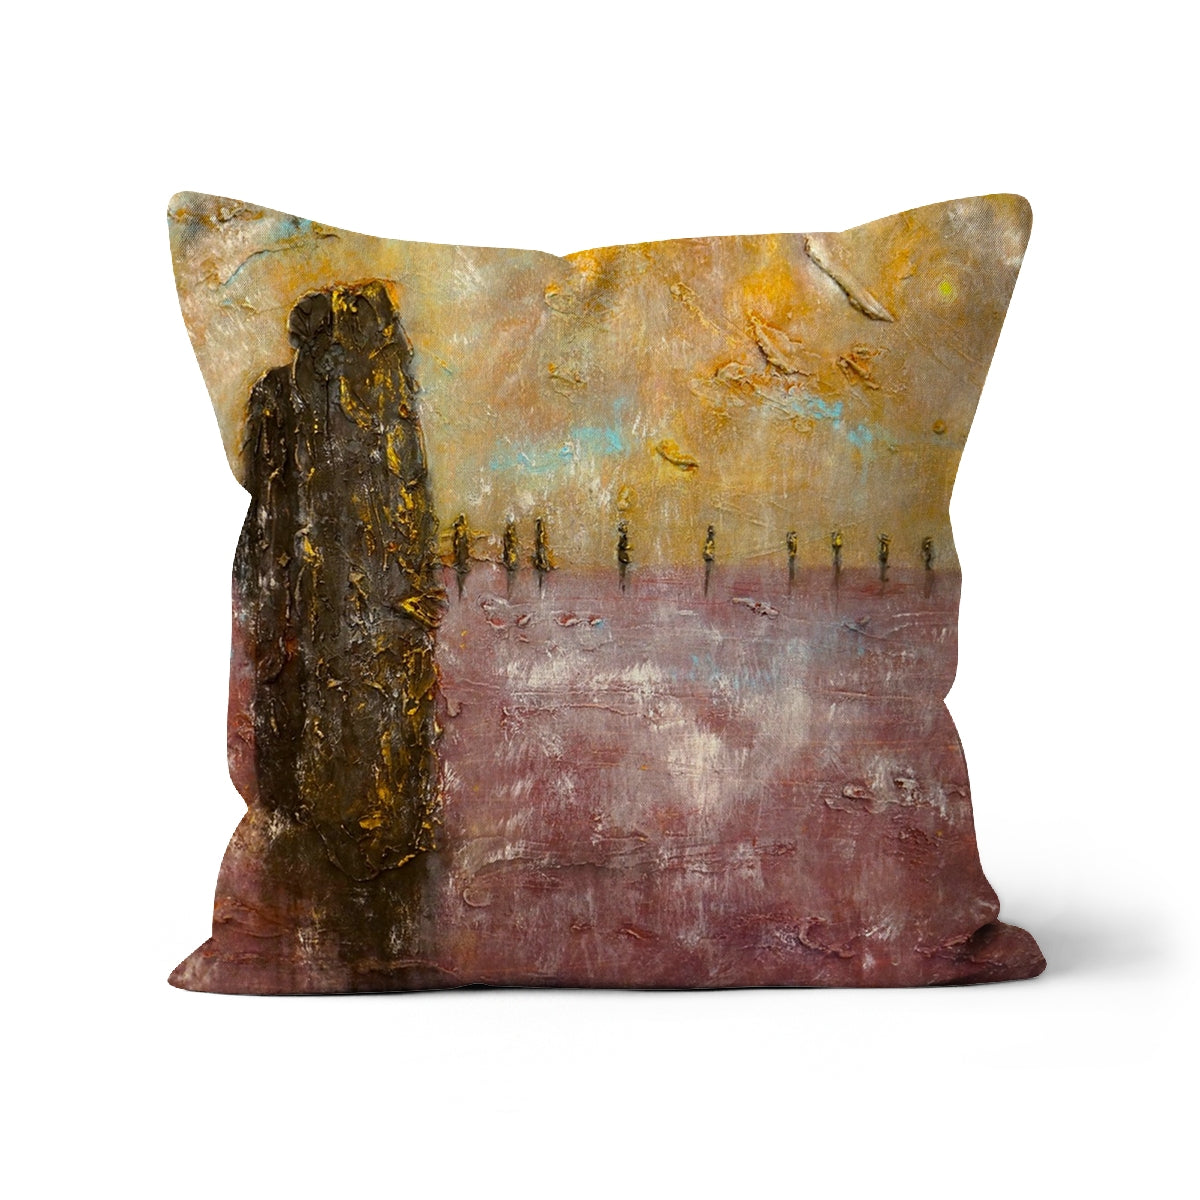 Brodgar Mist Orkney Art Gifts Cushion-Cushions-Orkney Art Gallery-Canvas-24"x24"-Paintings, Prints, Homeware, Art Gifts From Scotland By Scottish Artist Kevin Hunter